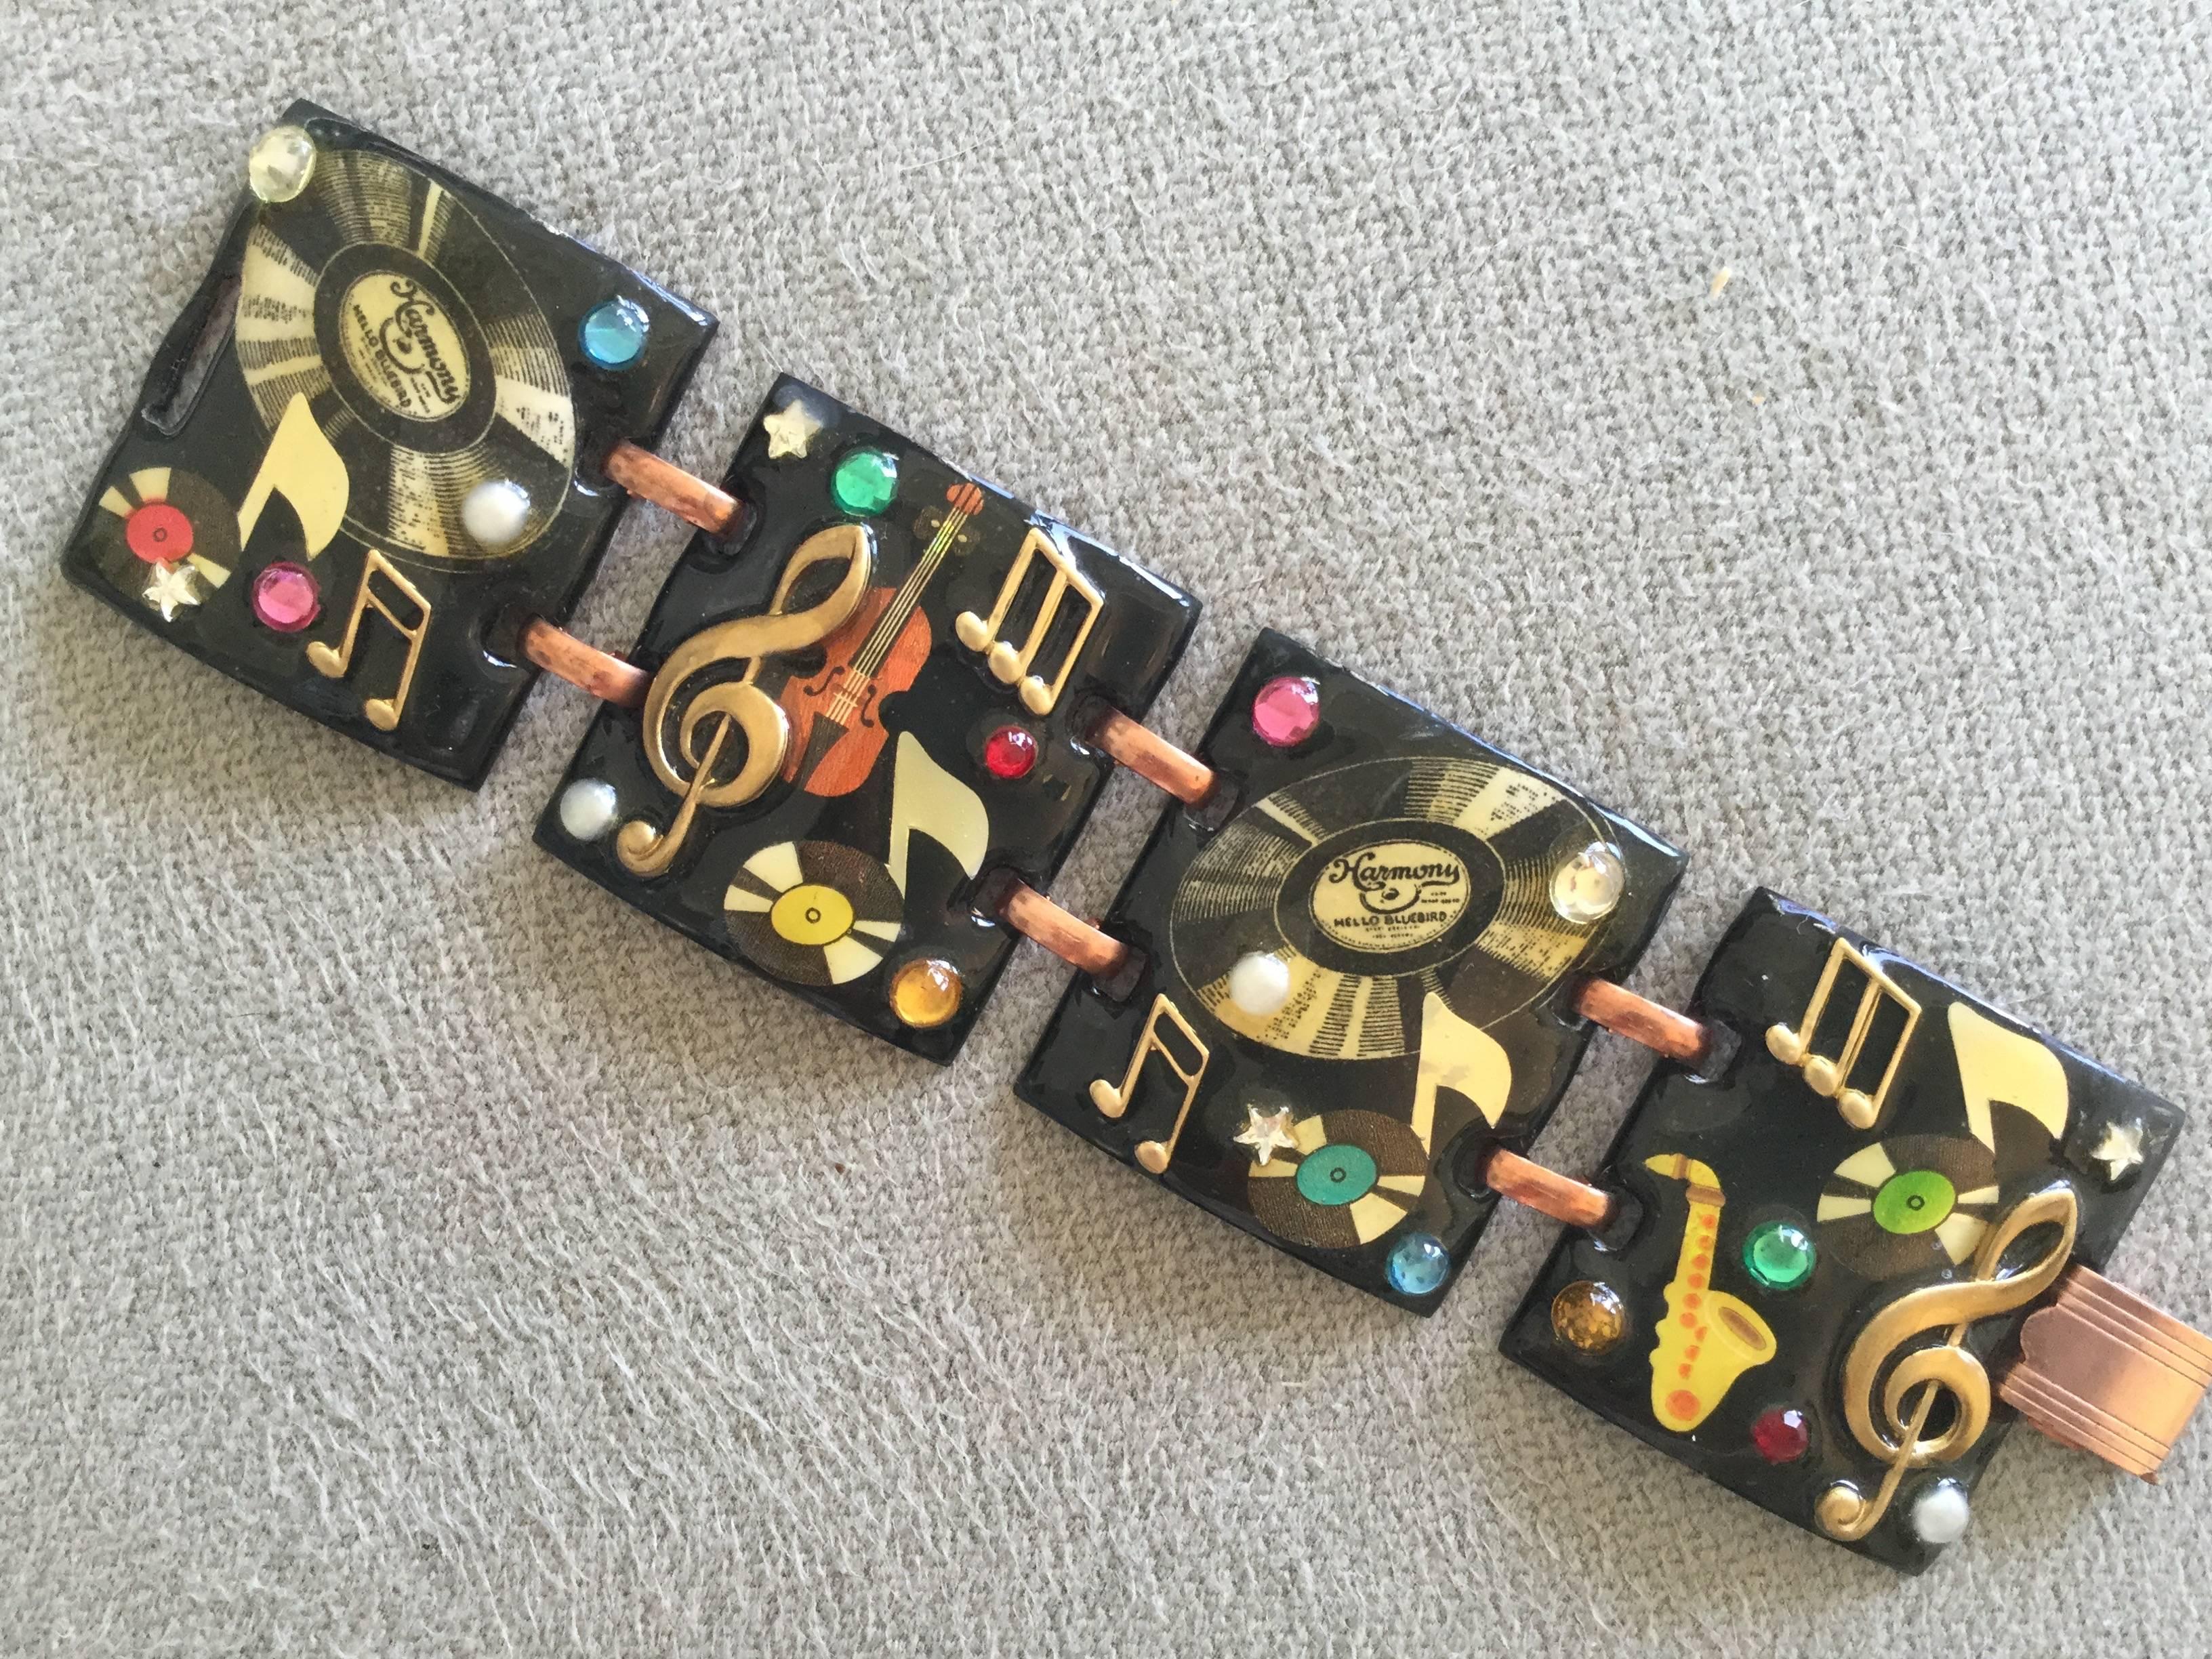 This is such a fun piece from the late 1950's.  Enamel on copper bracelet
depicting instruments, musical notes, and record albums. Further enlivened with faux pastes and pearls.  Most probably made in a mid-century California artisan's metalwork